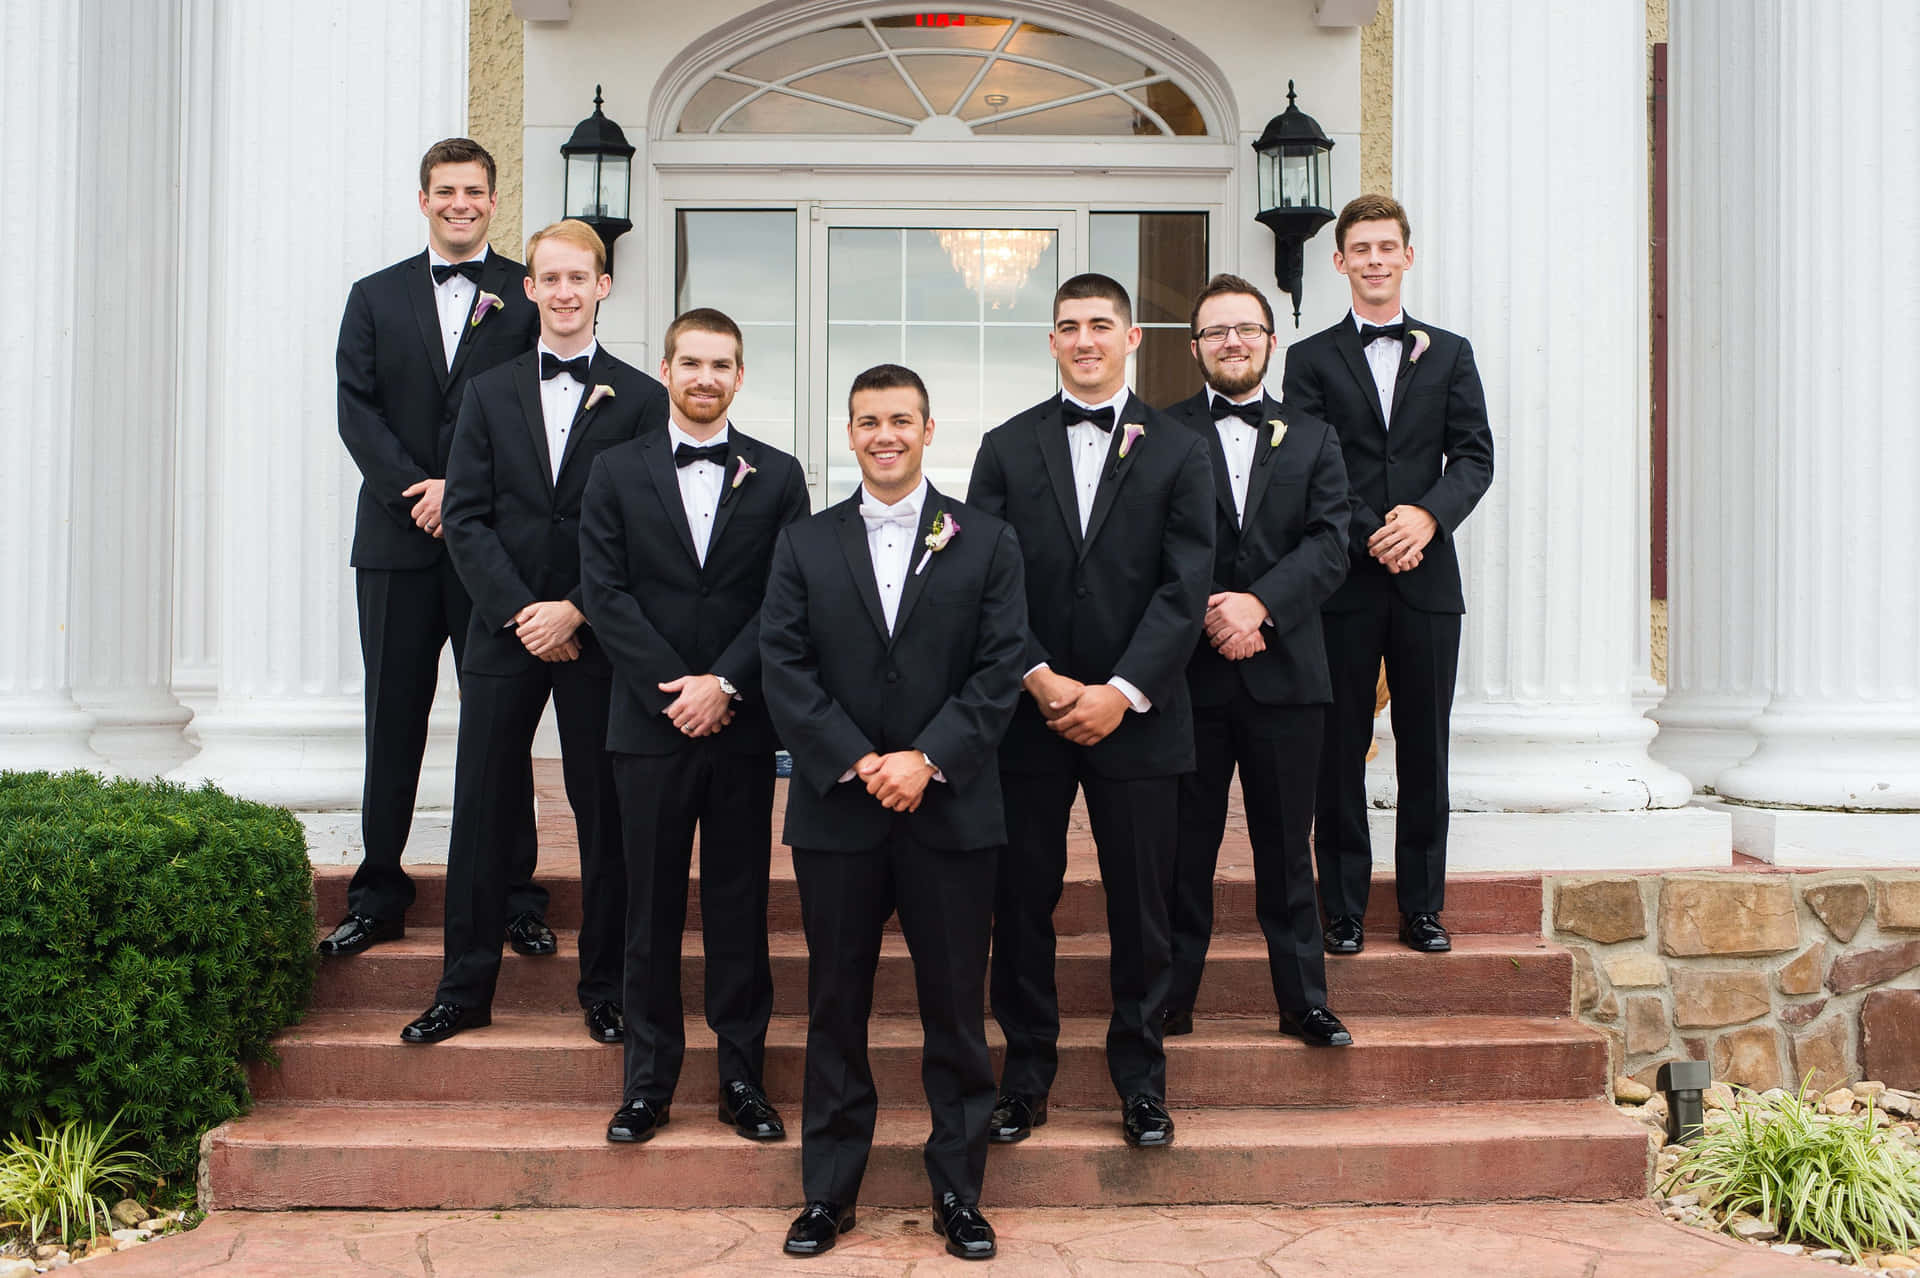 The perfect groomsmen for the perfect groom on his special day.